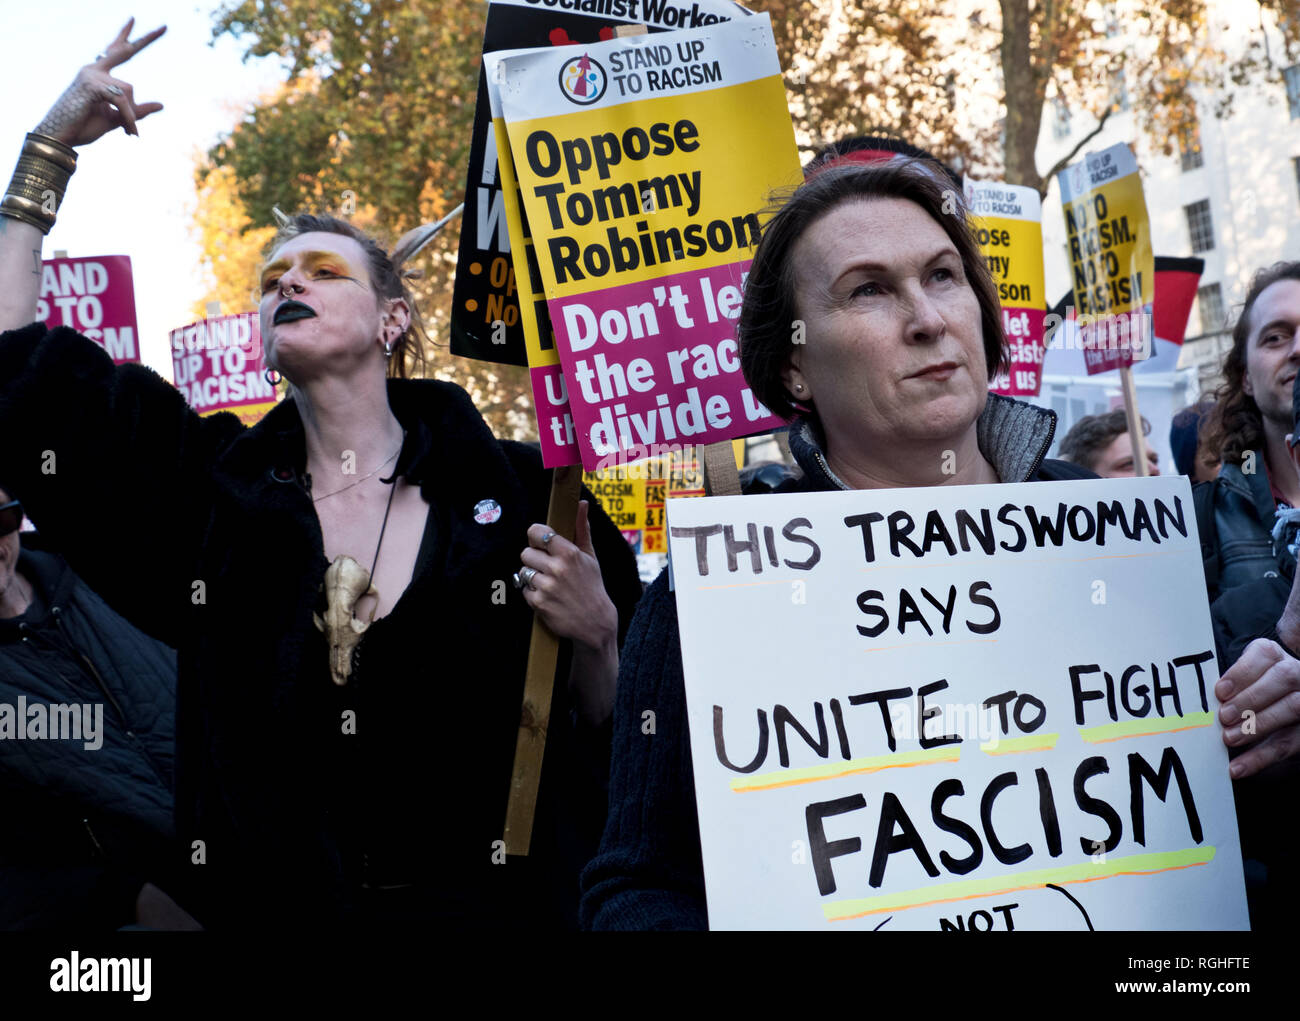 Transgender people marching against Tommy Robinson, racism and fascism. Anti-racism Anti-Fascism march and protest through central London on 17 Nov 2018 Stock Photo